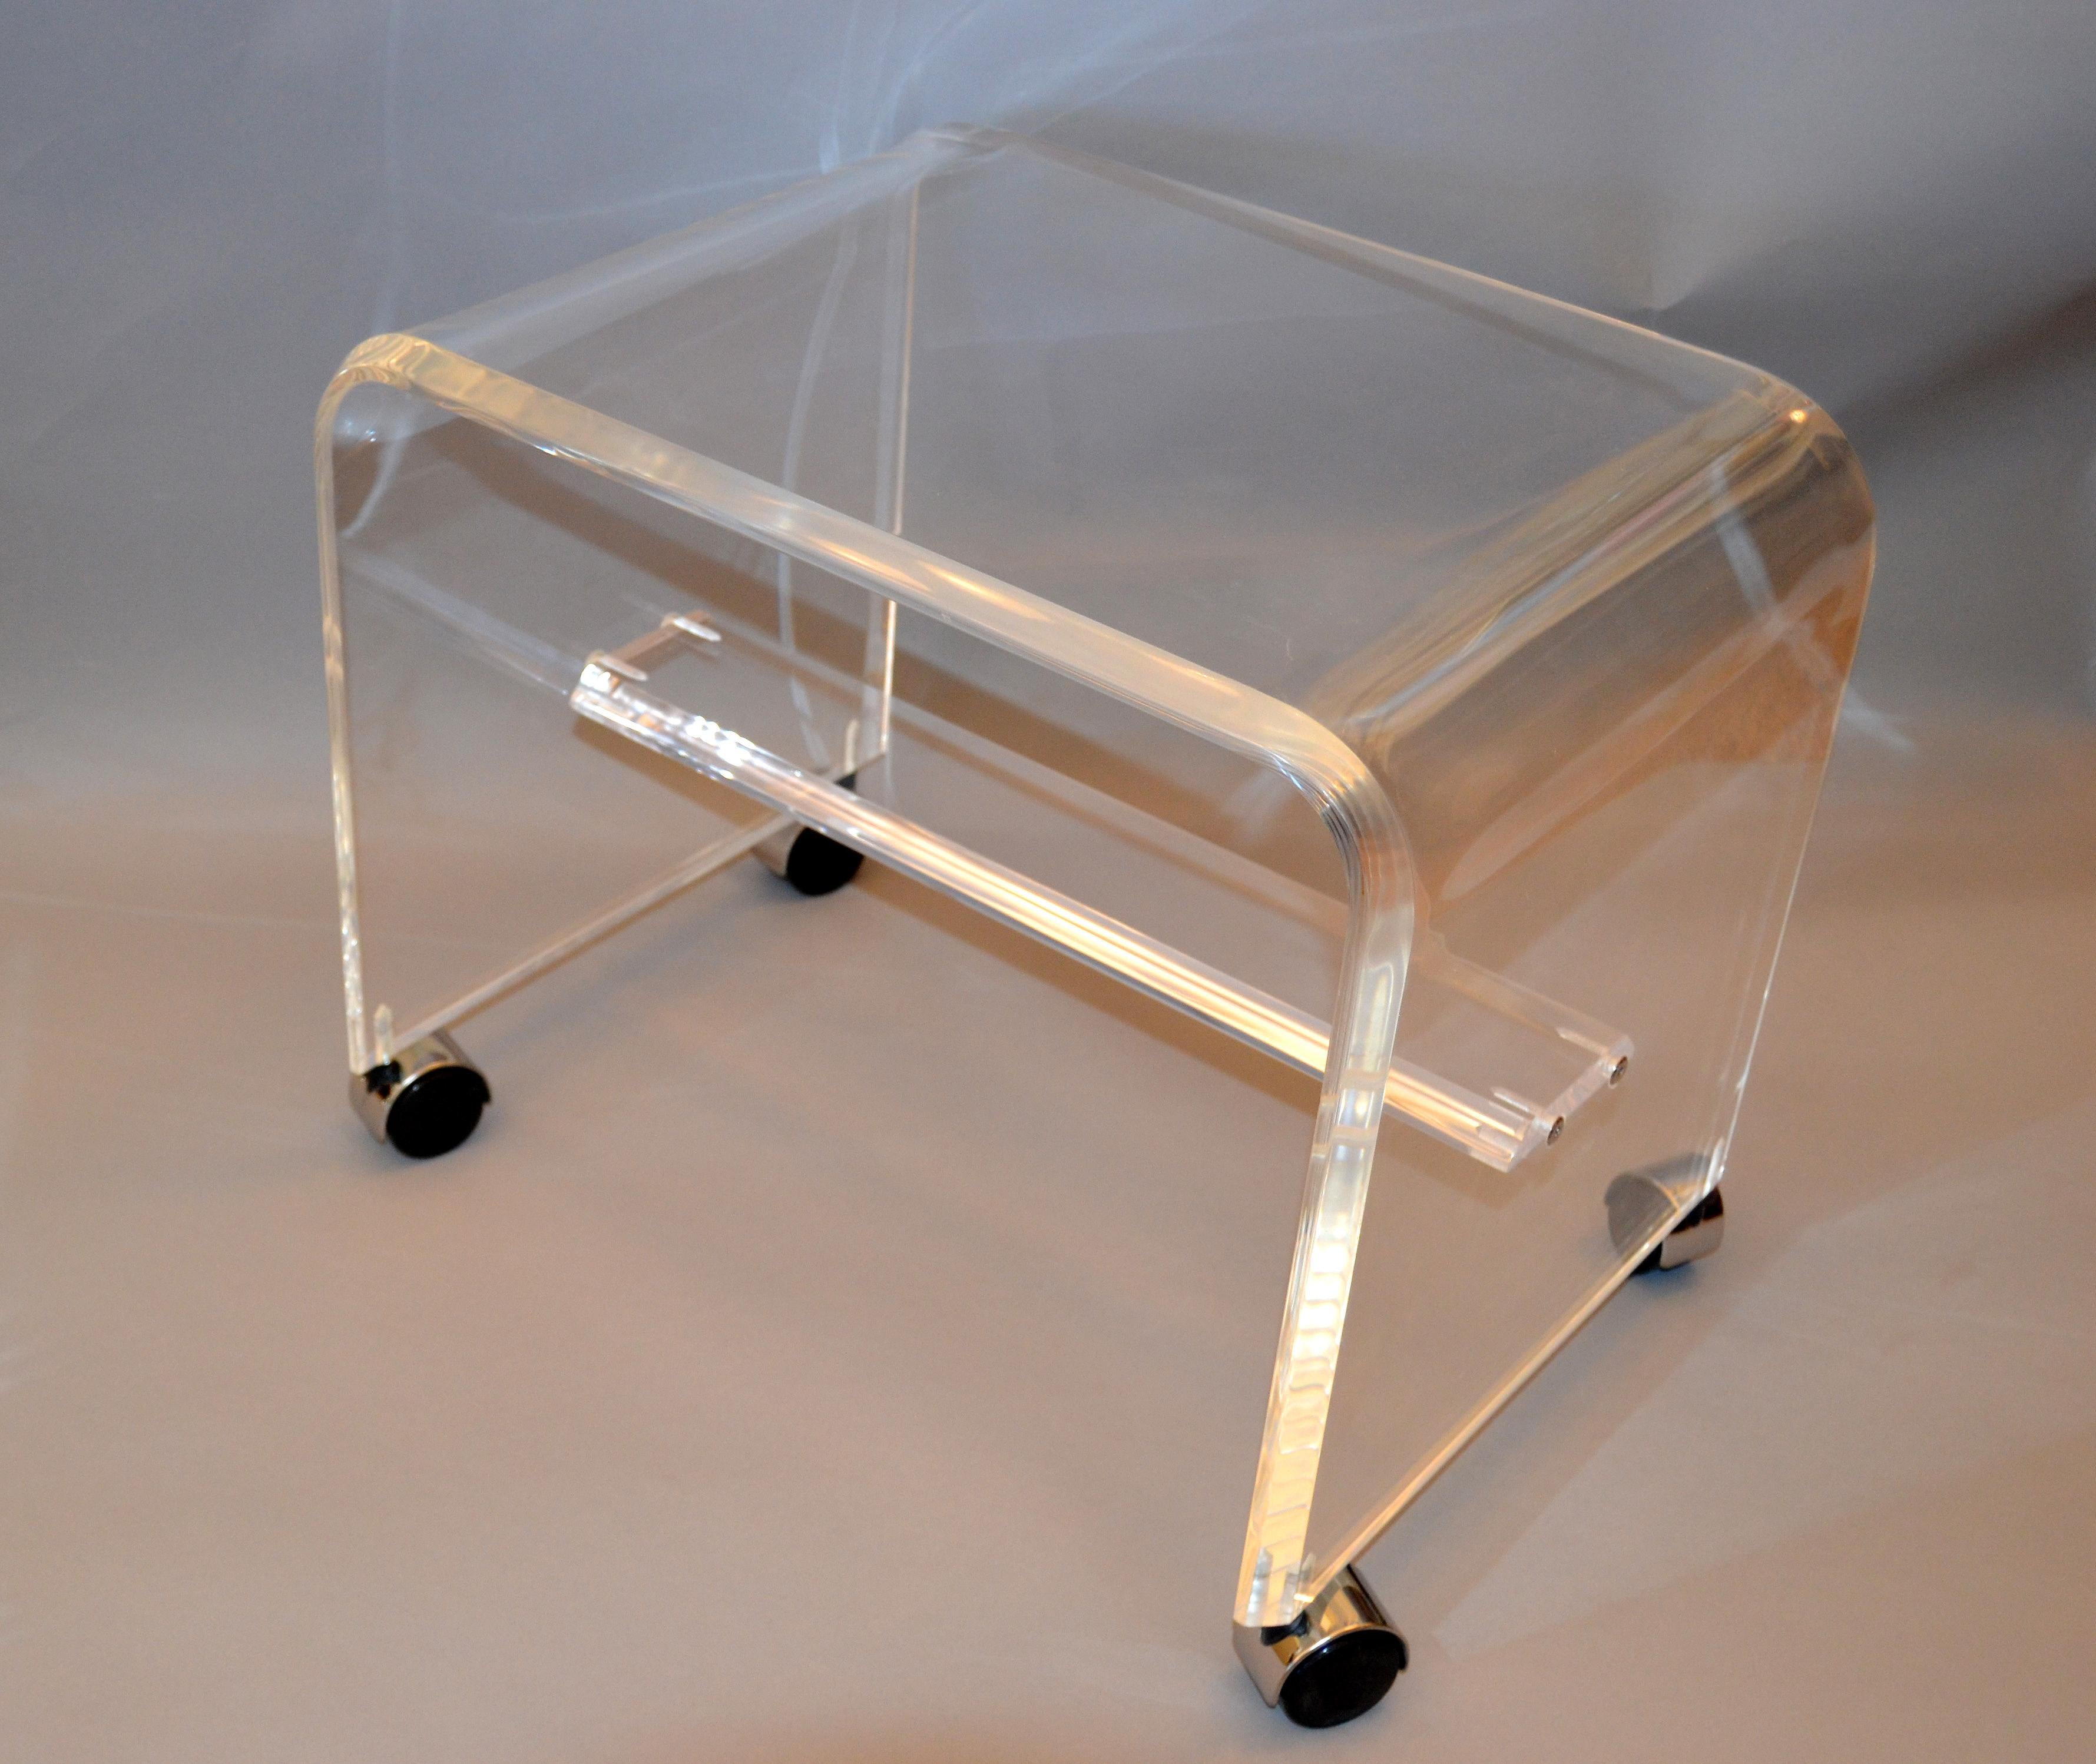 Mid-Century Modern Lucite or acrylic stool on chrome casters.
This stool can be used as a footstool, vanity stool or a place to put your magazine.
The stool is firm and sturdy and ready for your home.
 
 